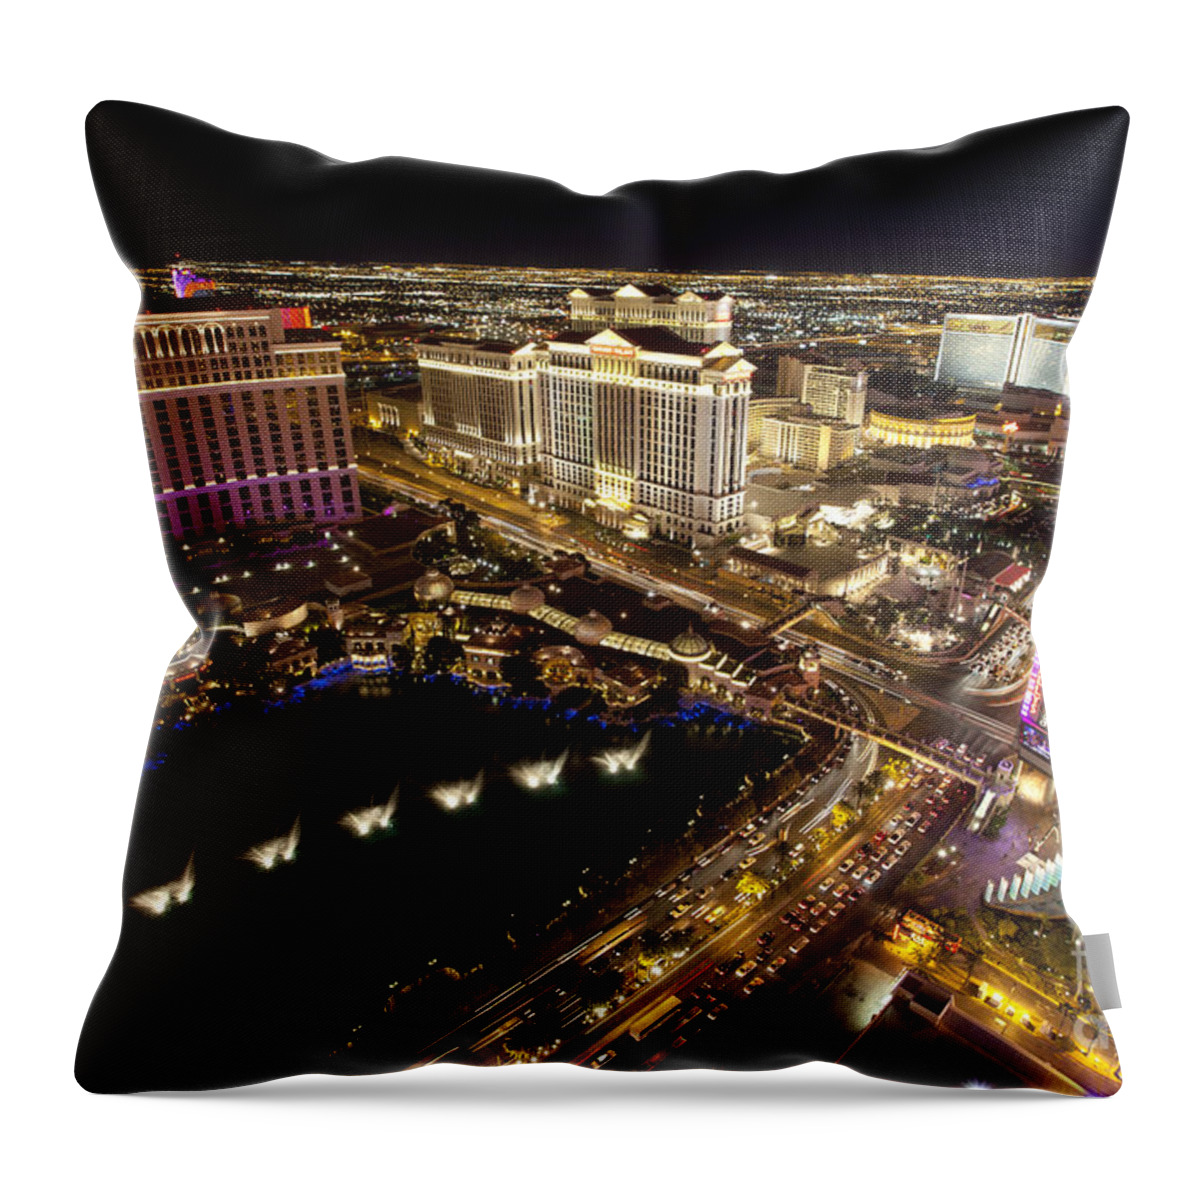 Las Vegas Throw Pillow featuring the photograph Las Vegas Nightlife #7 by Anthony Totah